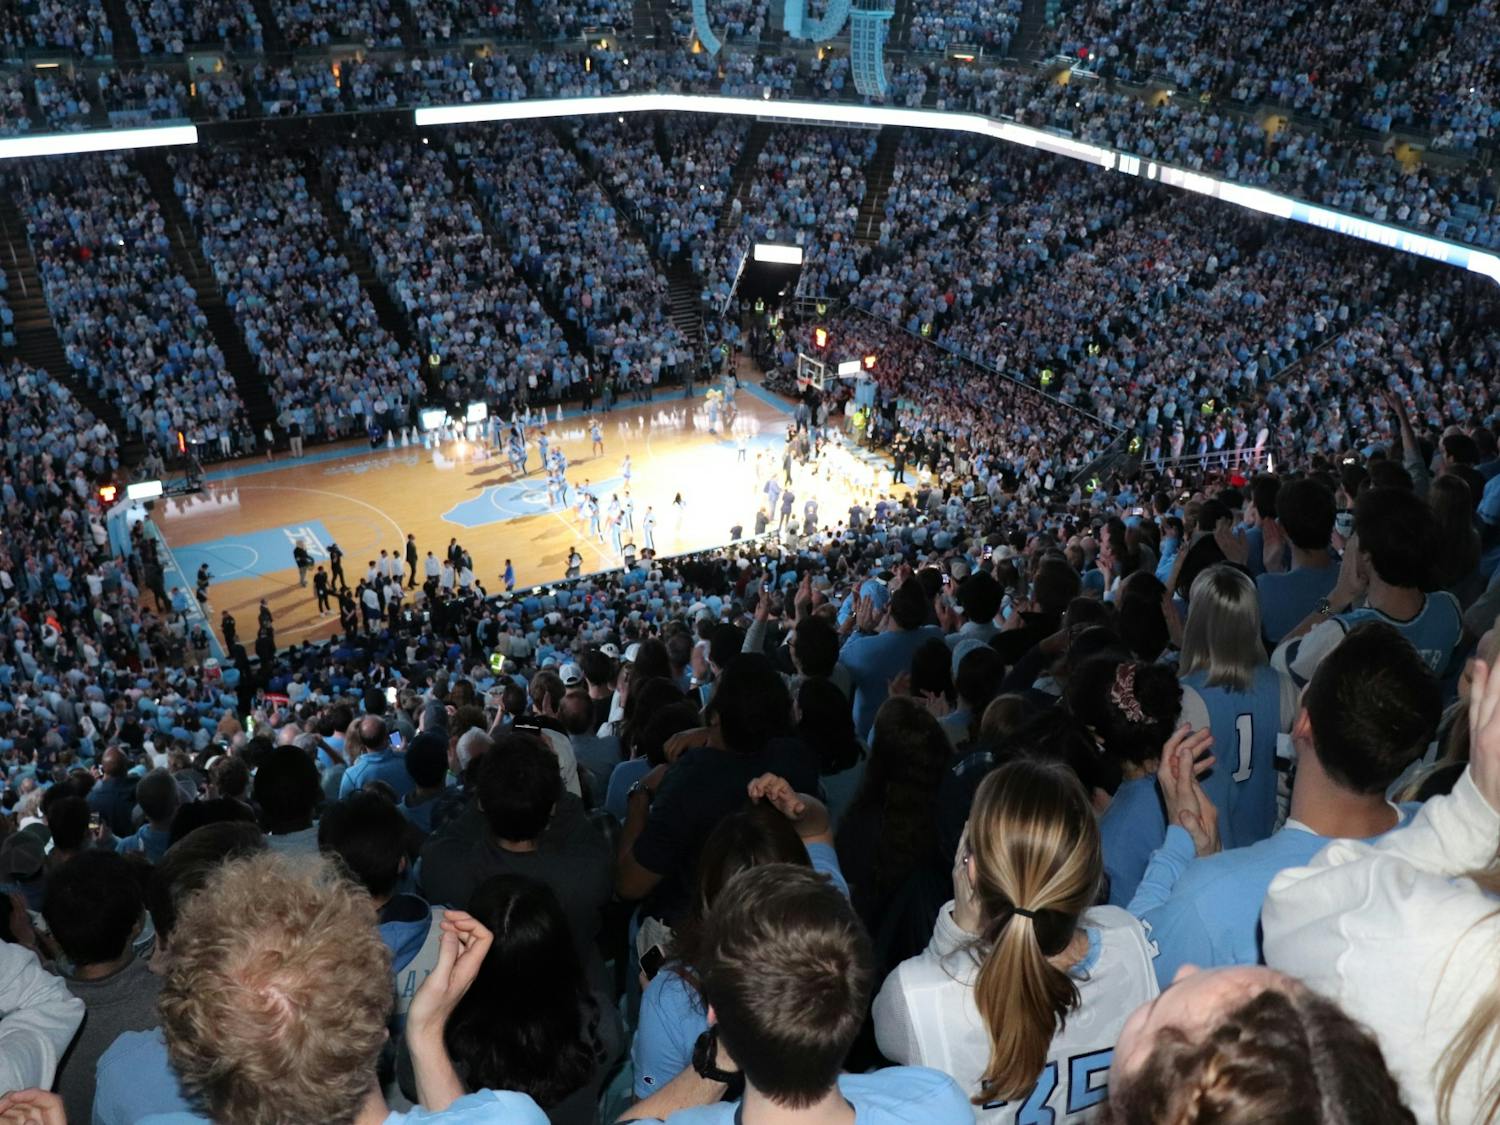 Students watch UNC basketball play Duke in the Smith Center on Saturday, Feb. 8, 2020. UNC lost to Duke in overtime 98-96.